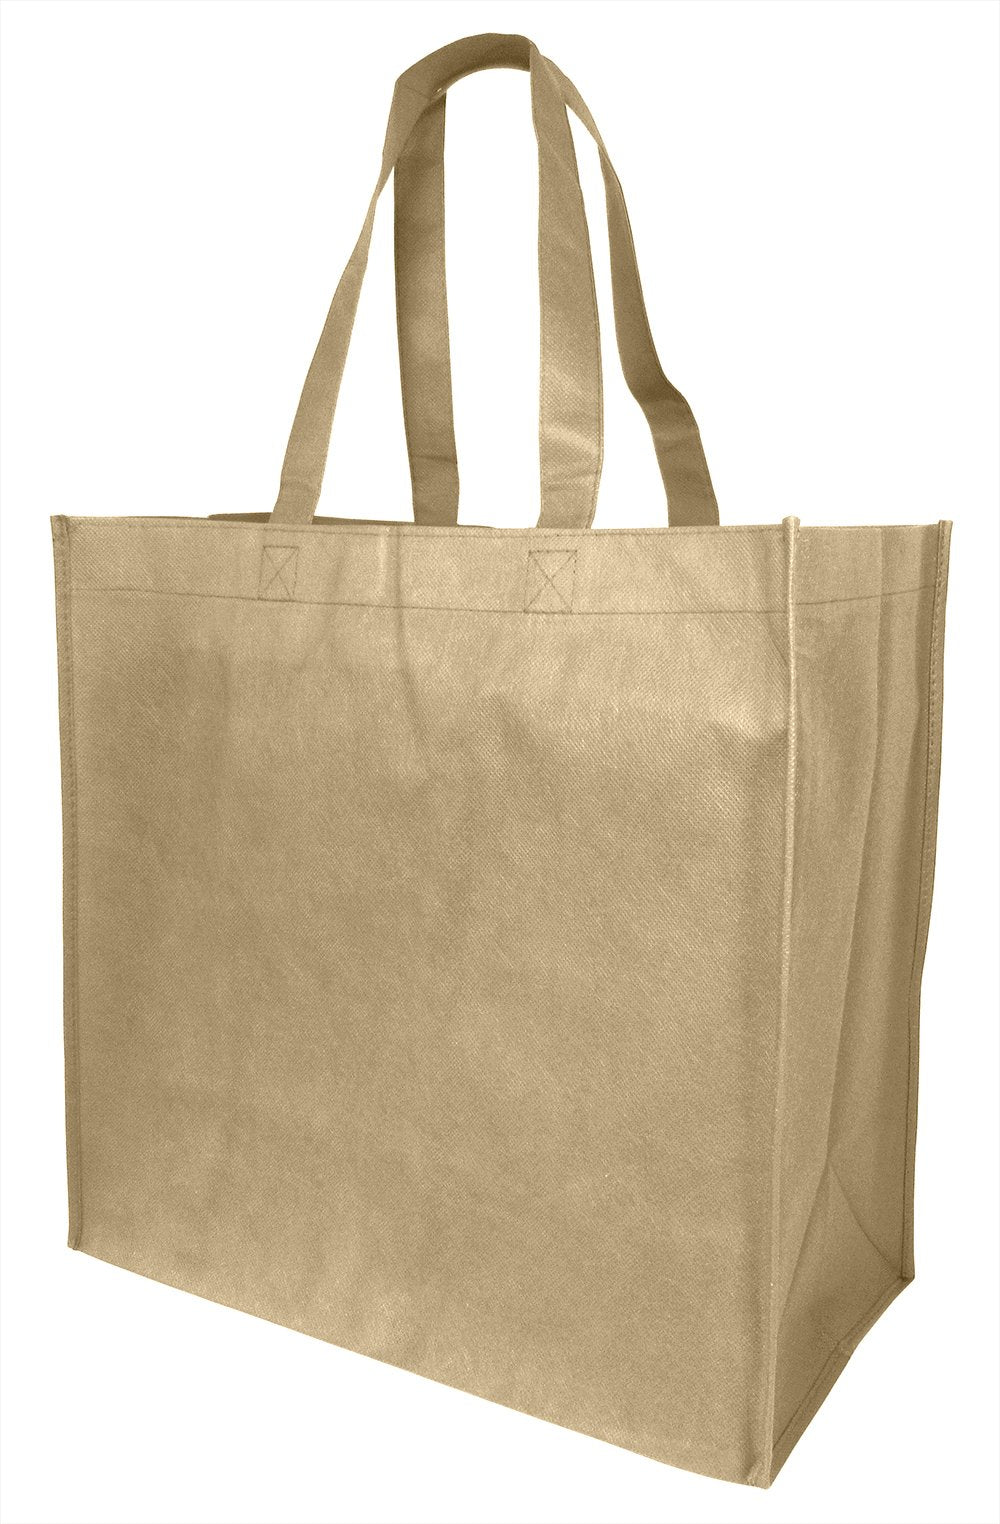 250 ct Large Polypropylene Grocery Tote Bag W/Gusset - By Case